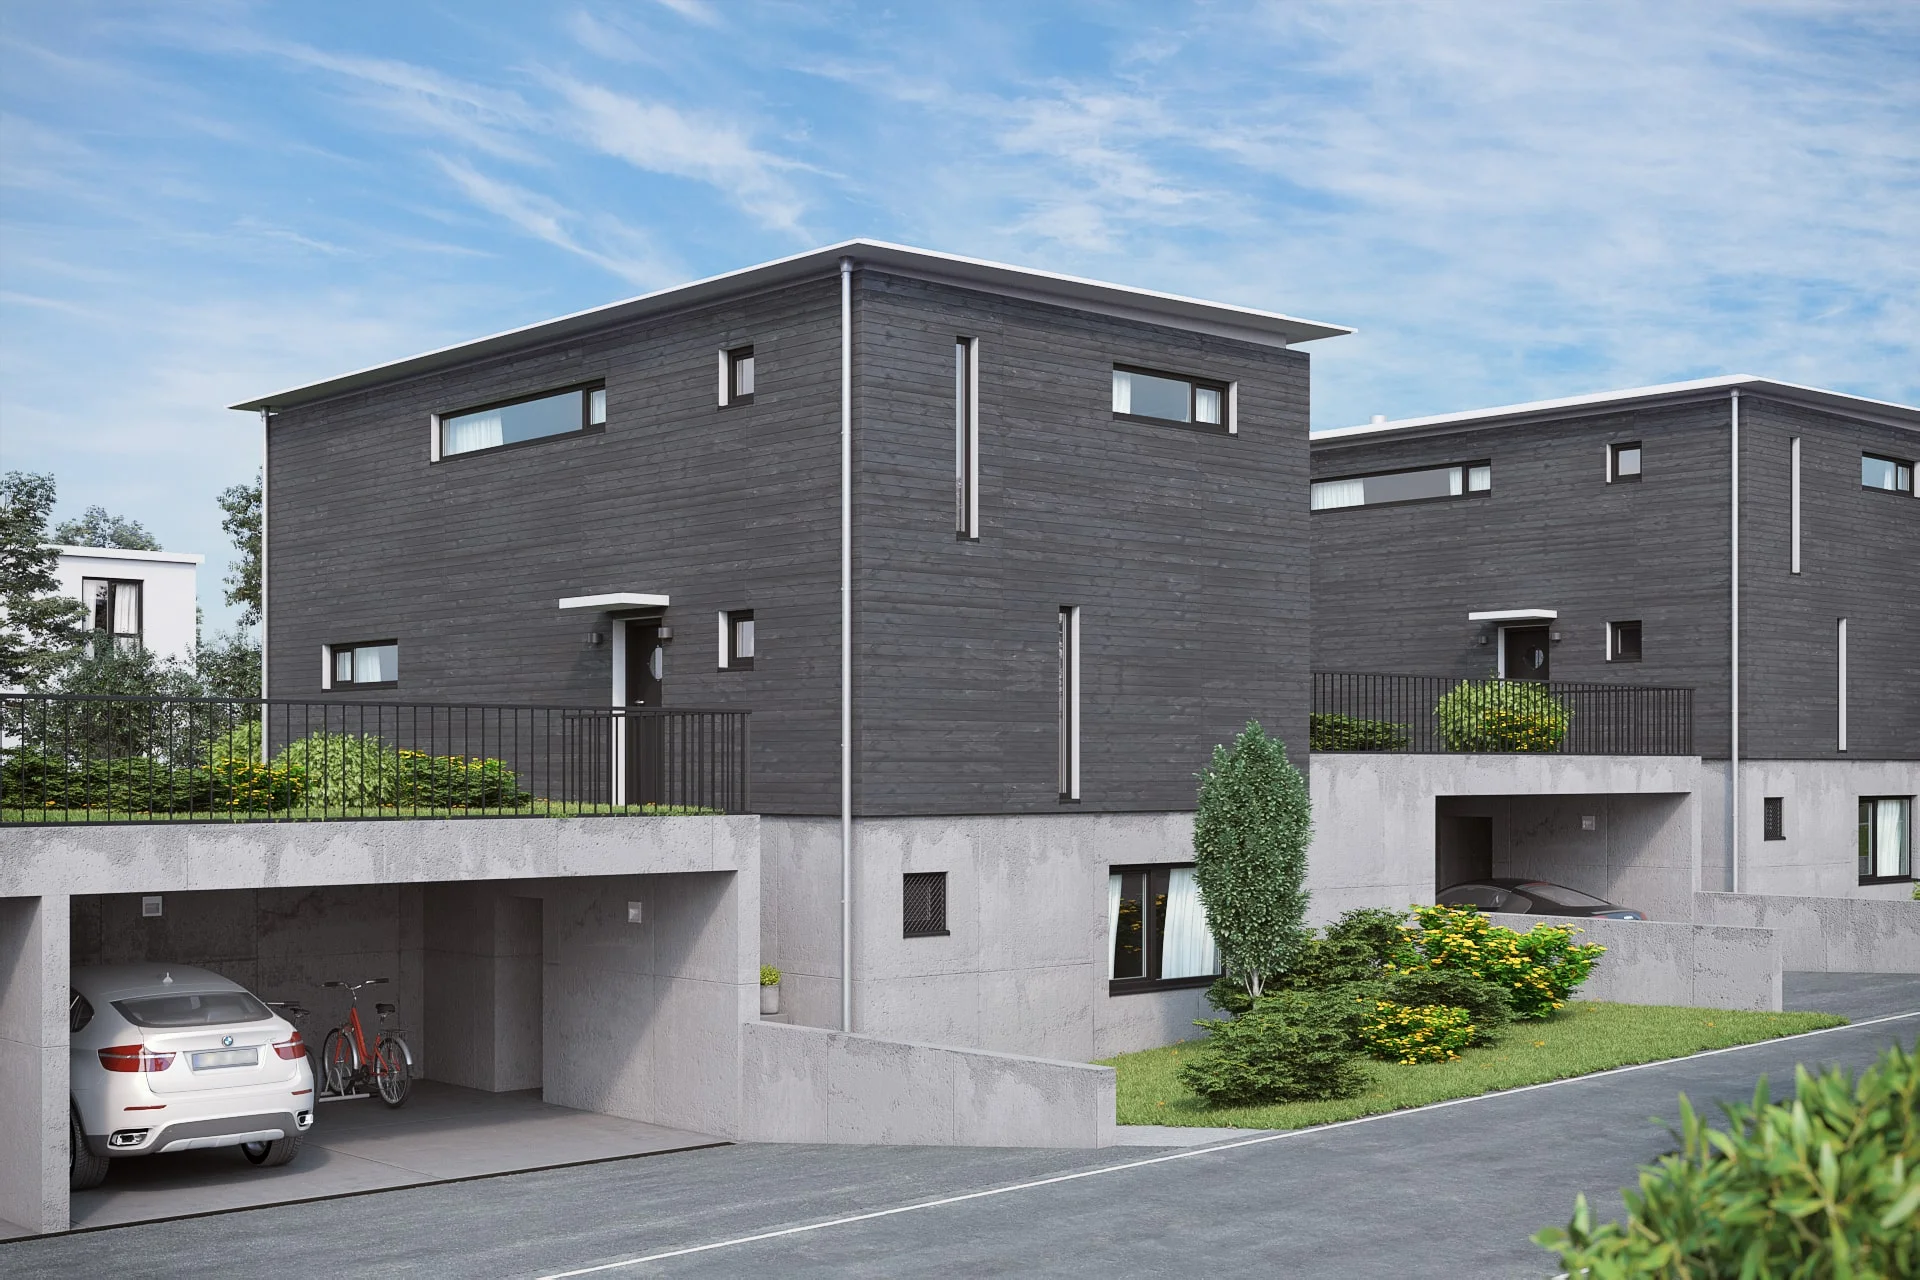 Architectural visualization. Single-family houses. Street view